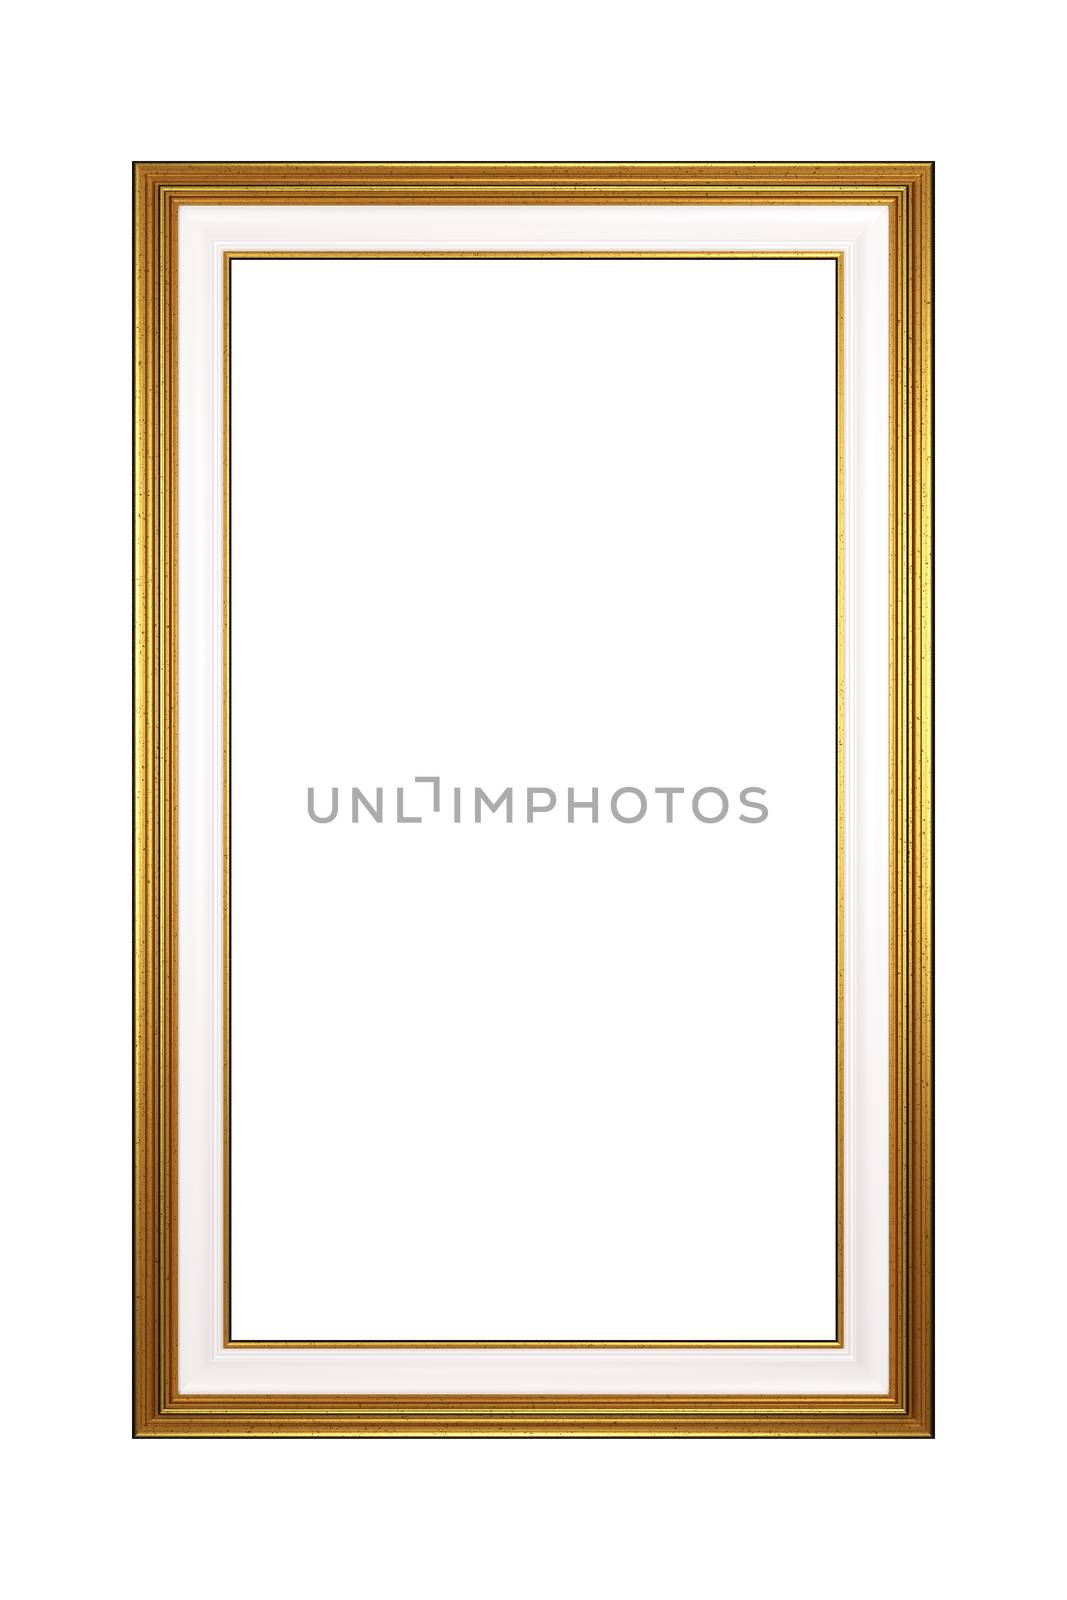 Classic Rectangular Portrait Empty Golden Picture Frame Isolated on White Background 3D Render